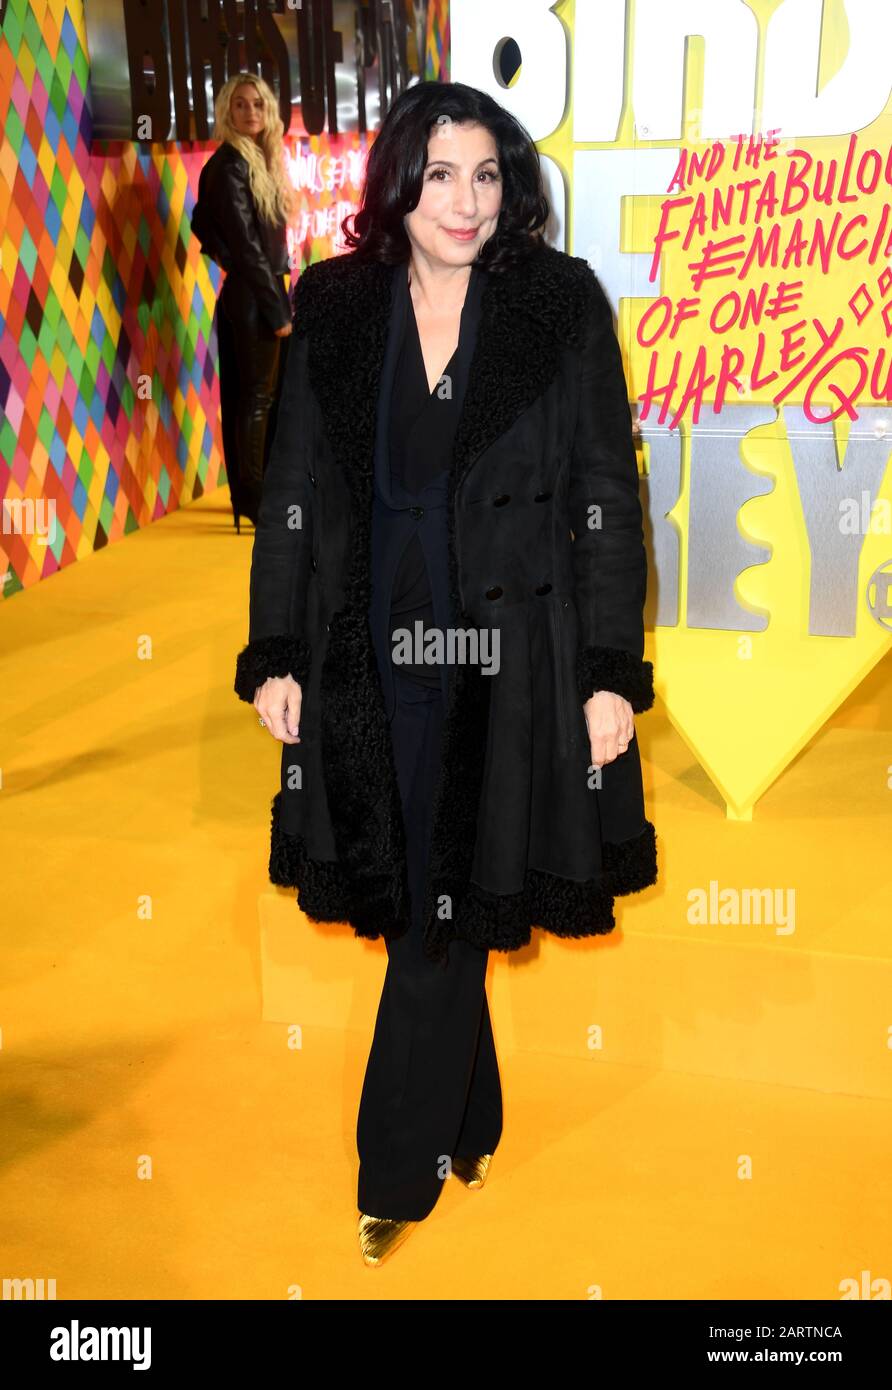 Sue Kroll attending the world premiere of Birds of Prey and the Fantabulous Emancipation of One Harley Quinn, held at the BFI IMAX, London. Stock Photo